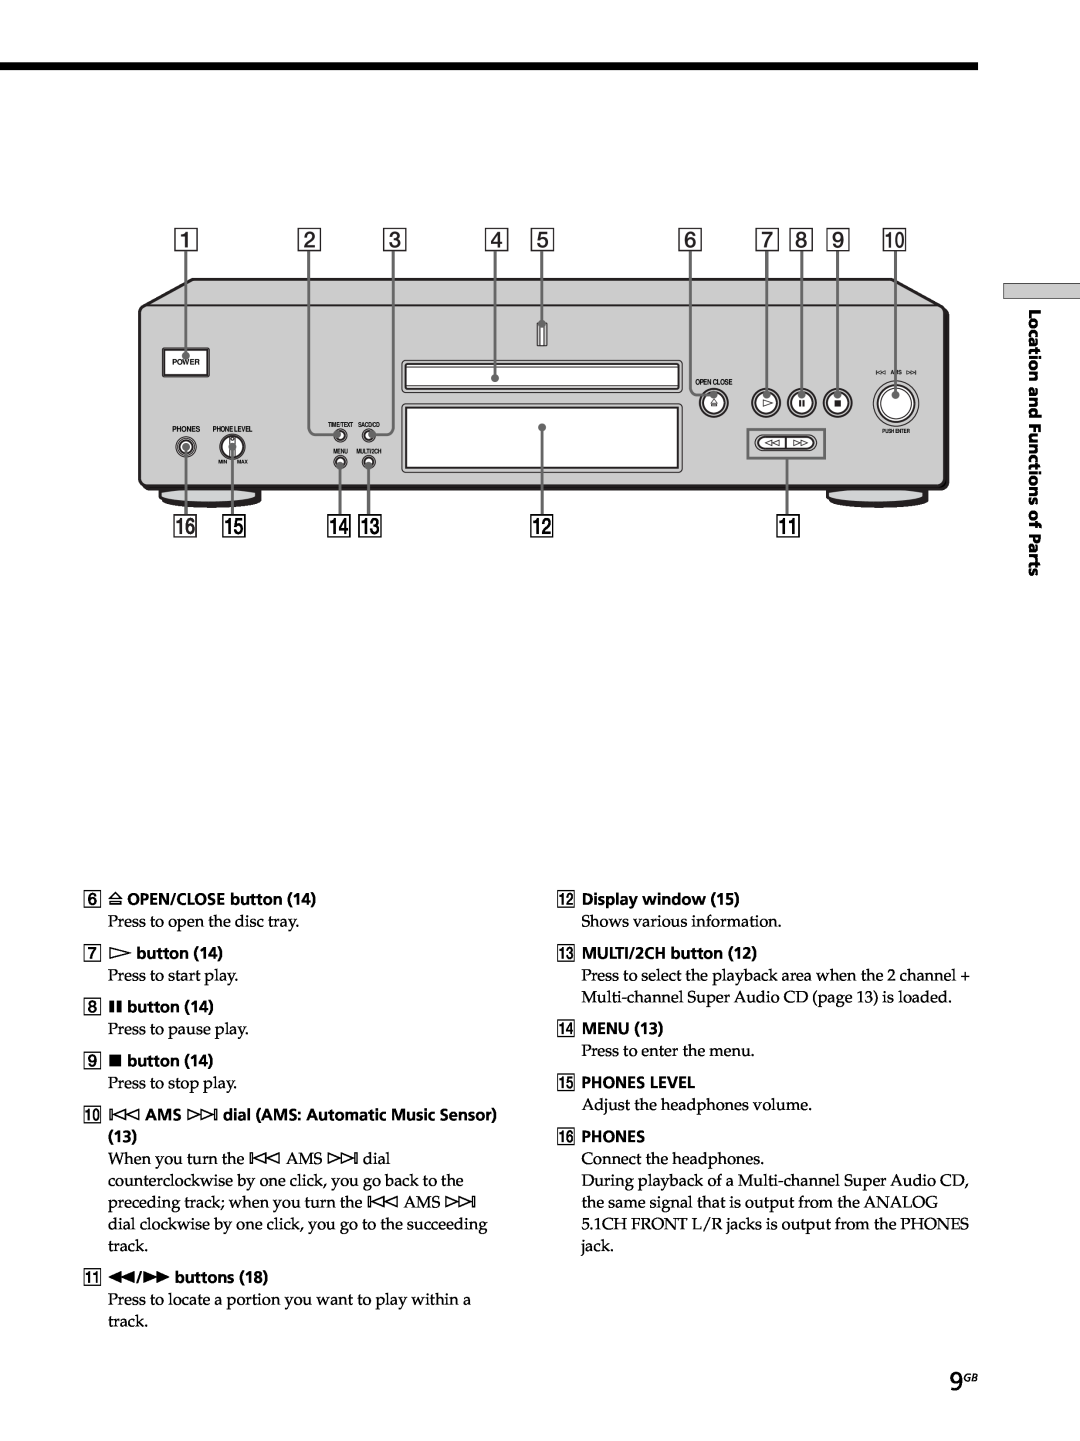 Sony SCD-XB770 operating instructions Location and Functions of Parts 